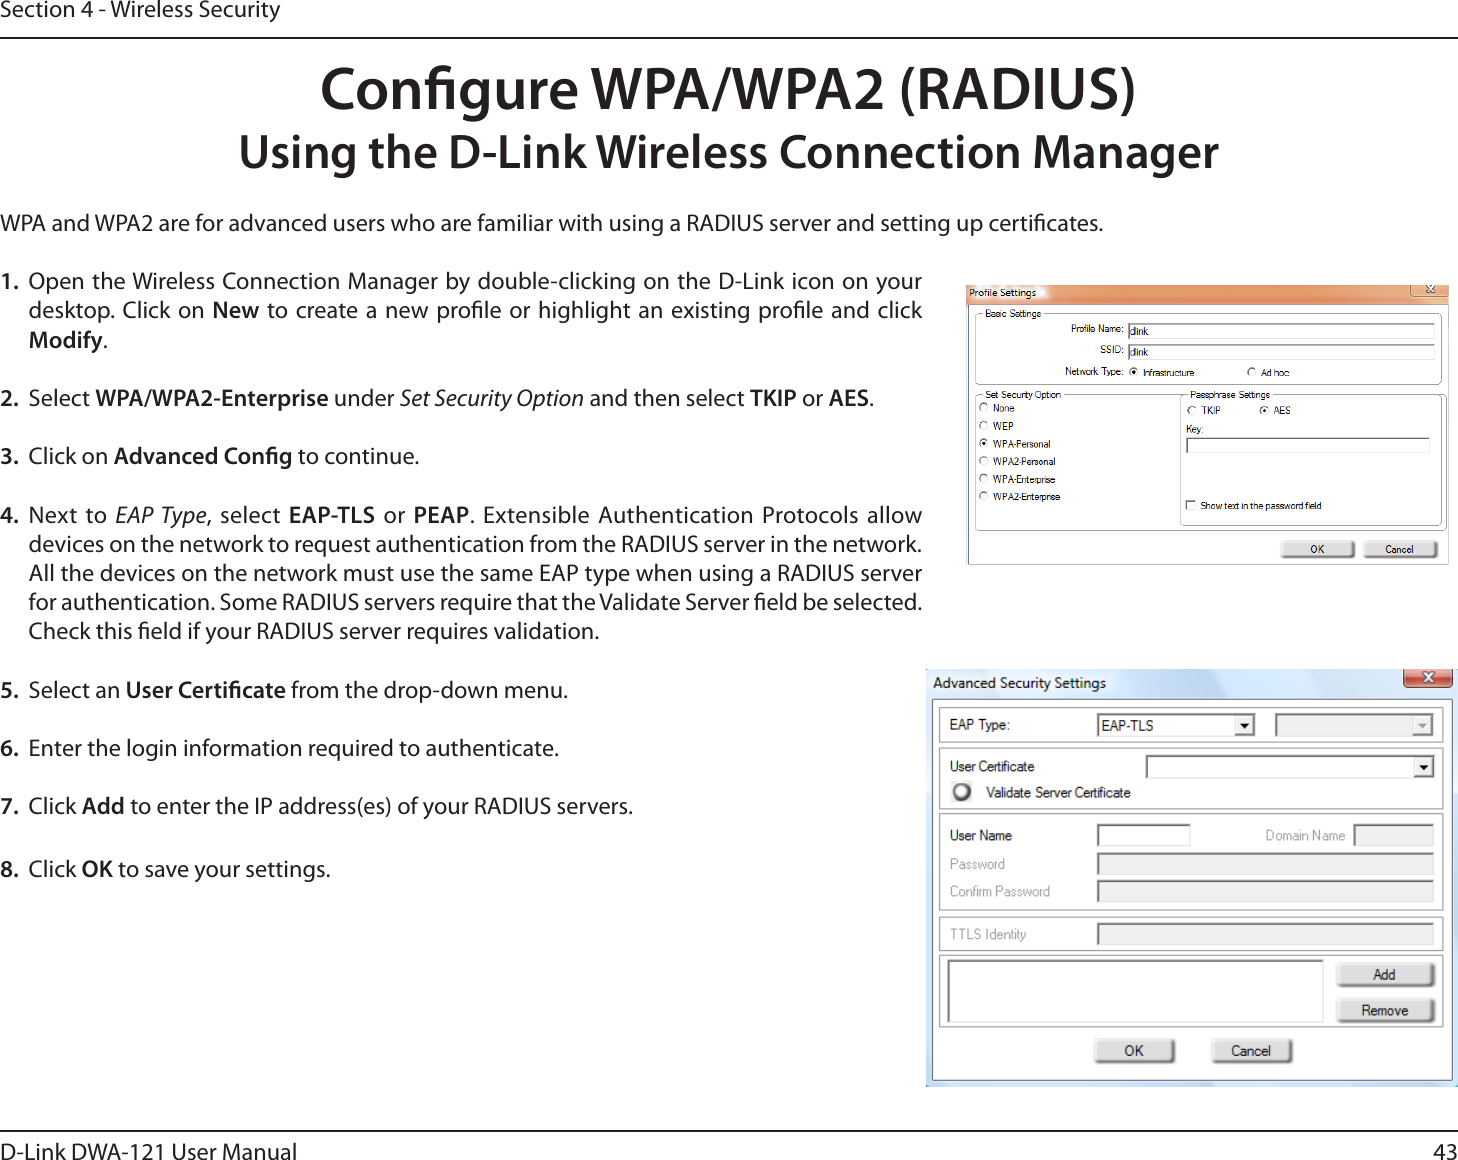 43D-Link DWA-121 User ManualSection 4 - Wireless SecurityCongure WPA/WPA2 (RADIUS)Using the D-Link Wireless Connection ManagerWPA and WPA2 are for advanced users who are familiar with using a RADIUS server and setting up certicates.1.  Open the Wireless Connection Manager by double-clicking on the D-Link icon on your desktop. Click on New to create a new prole or highlight an existing prole and click Modify. 2. Select WPA/WPA2-Enterprise under Set Security Option and then select TKIP or AES.3. Click on Advanced Cong to continue.4. Next to EAP Type, select EAP-TLS or PEAP. Extensible Authentication Protocols allow devices on the network to request authentication from the RADIUS server in the network. All the devices on the network must use the same EAP type when using a RADIUS server for authentication. Some RADIUS servers require that the Validate Server eld be selected. Check this eld if your RADIUS server requires validation.5. Select an User Certicate from the drop-down menu.6.  Enter the login information required to authenticate.7. Click Add to enter the IP address(es) of your RADIUS servers.8. Click OK to save your settings.